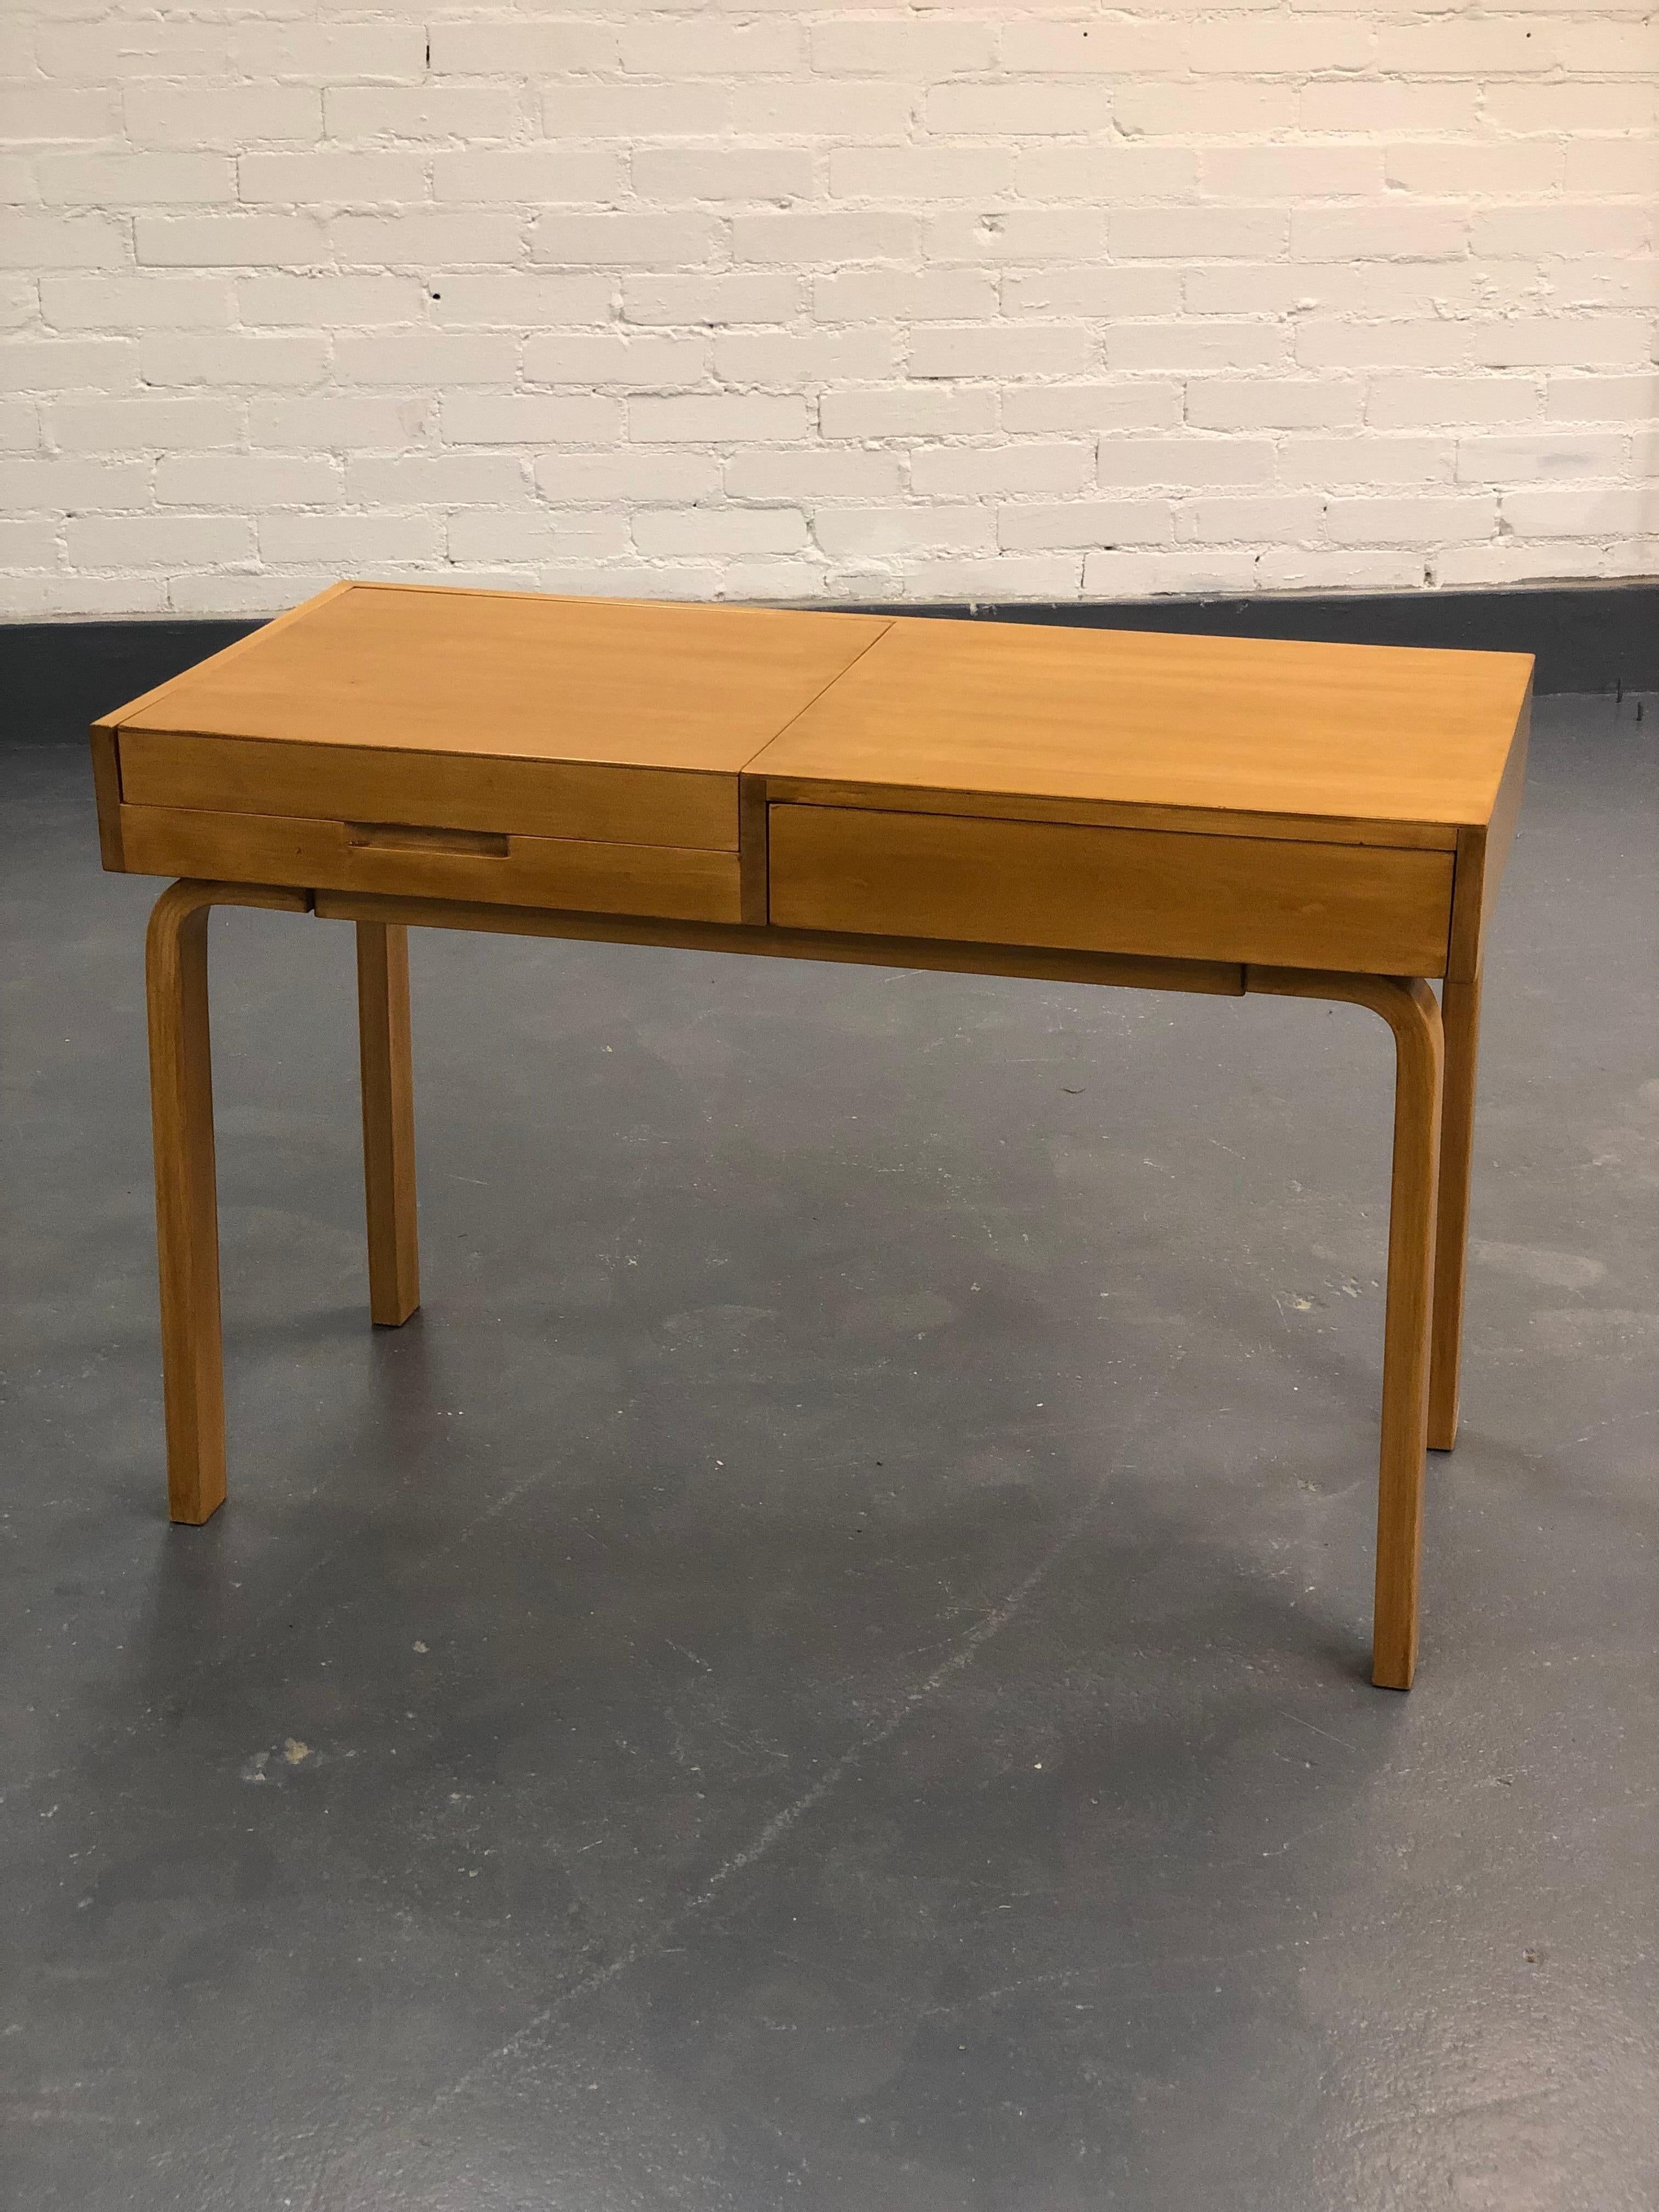 Over half a century later, from its original days of manufacturing, this dressing table designed by Alvar Aalto and made by Artek, is extremely hard to come by anymore. This particular piece comes in original condition with all of the original